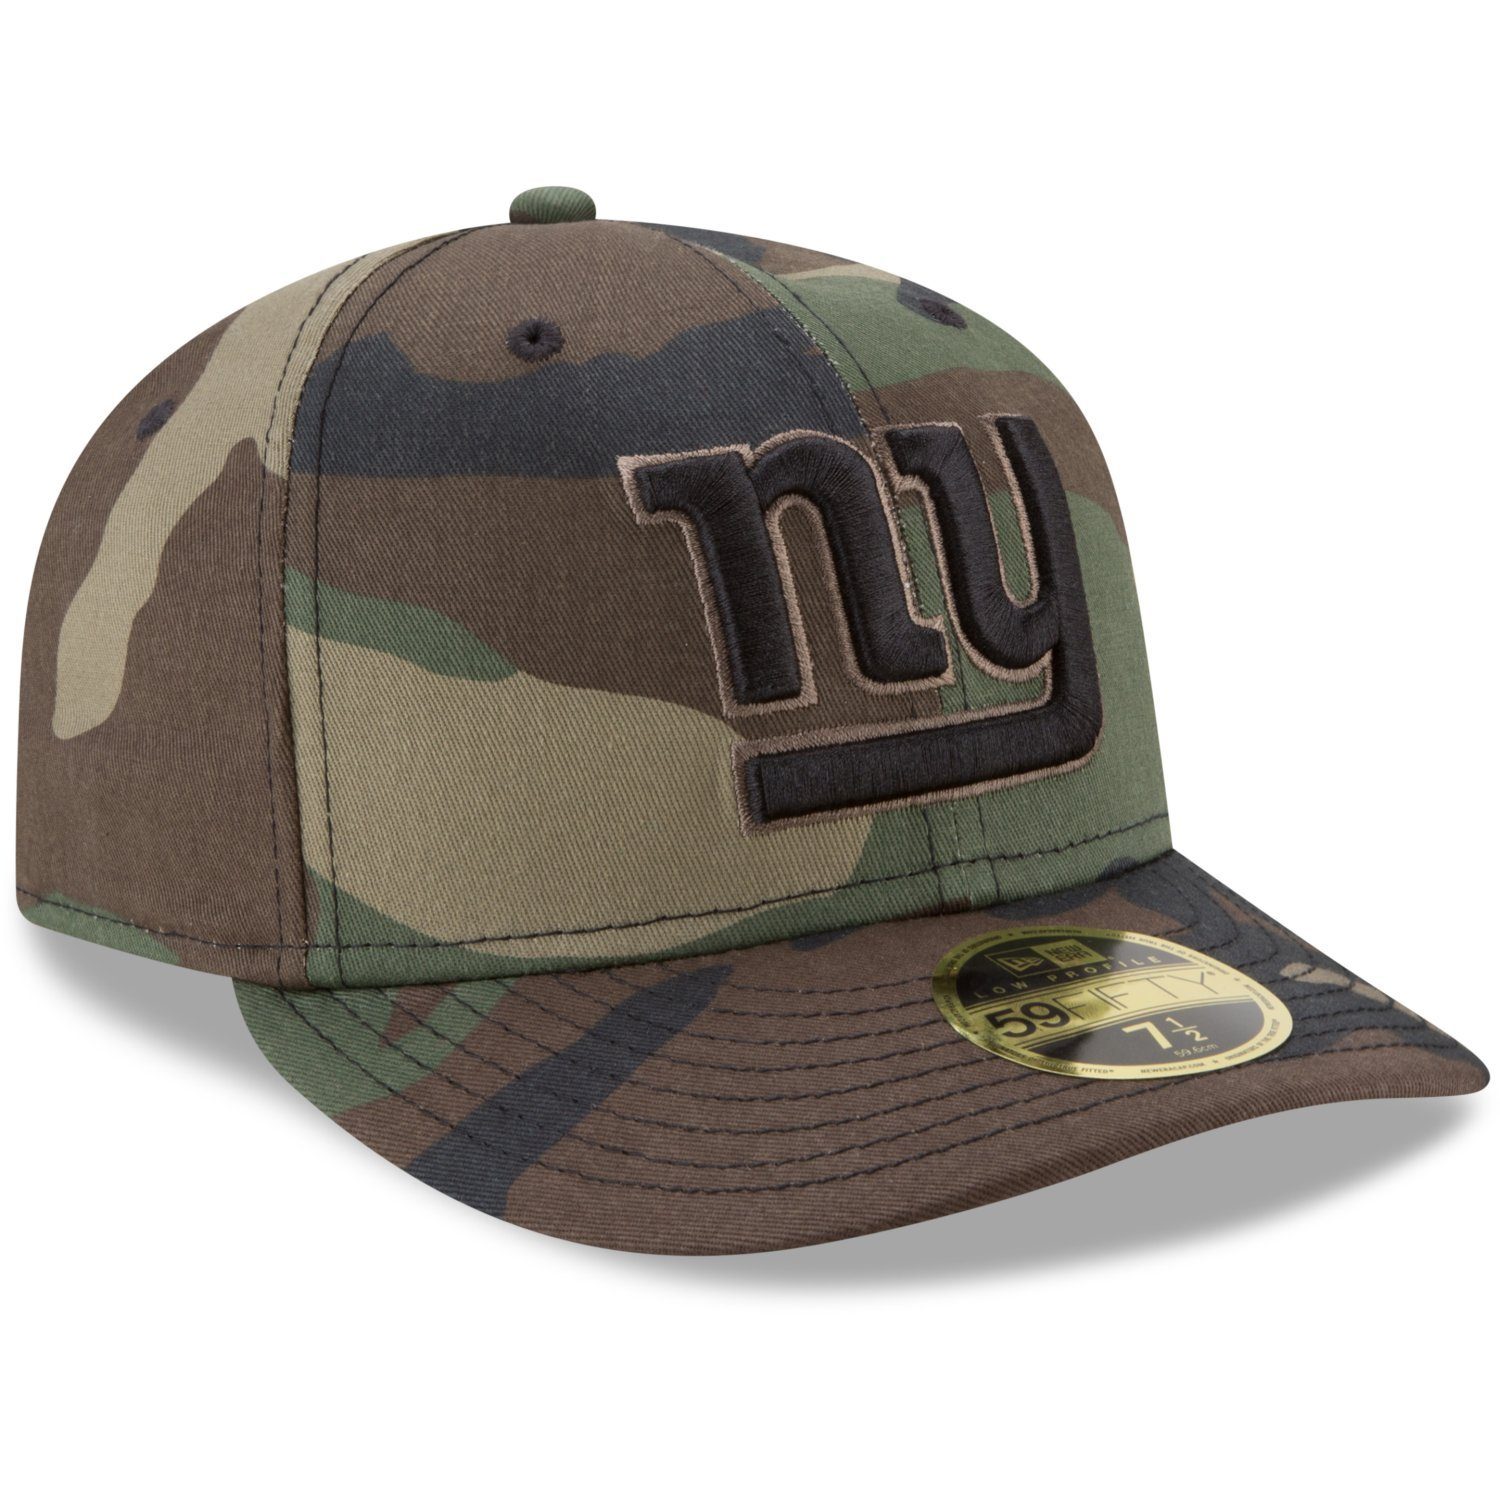 Low Giants Teams York Fitted 59Fifty New New Era NFL Profile woodland Cap